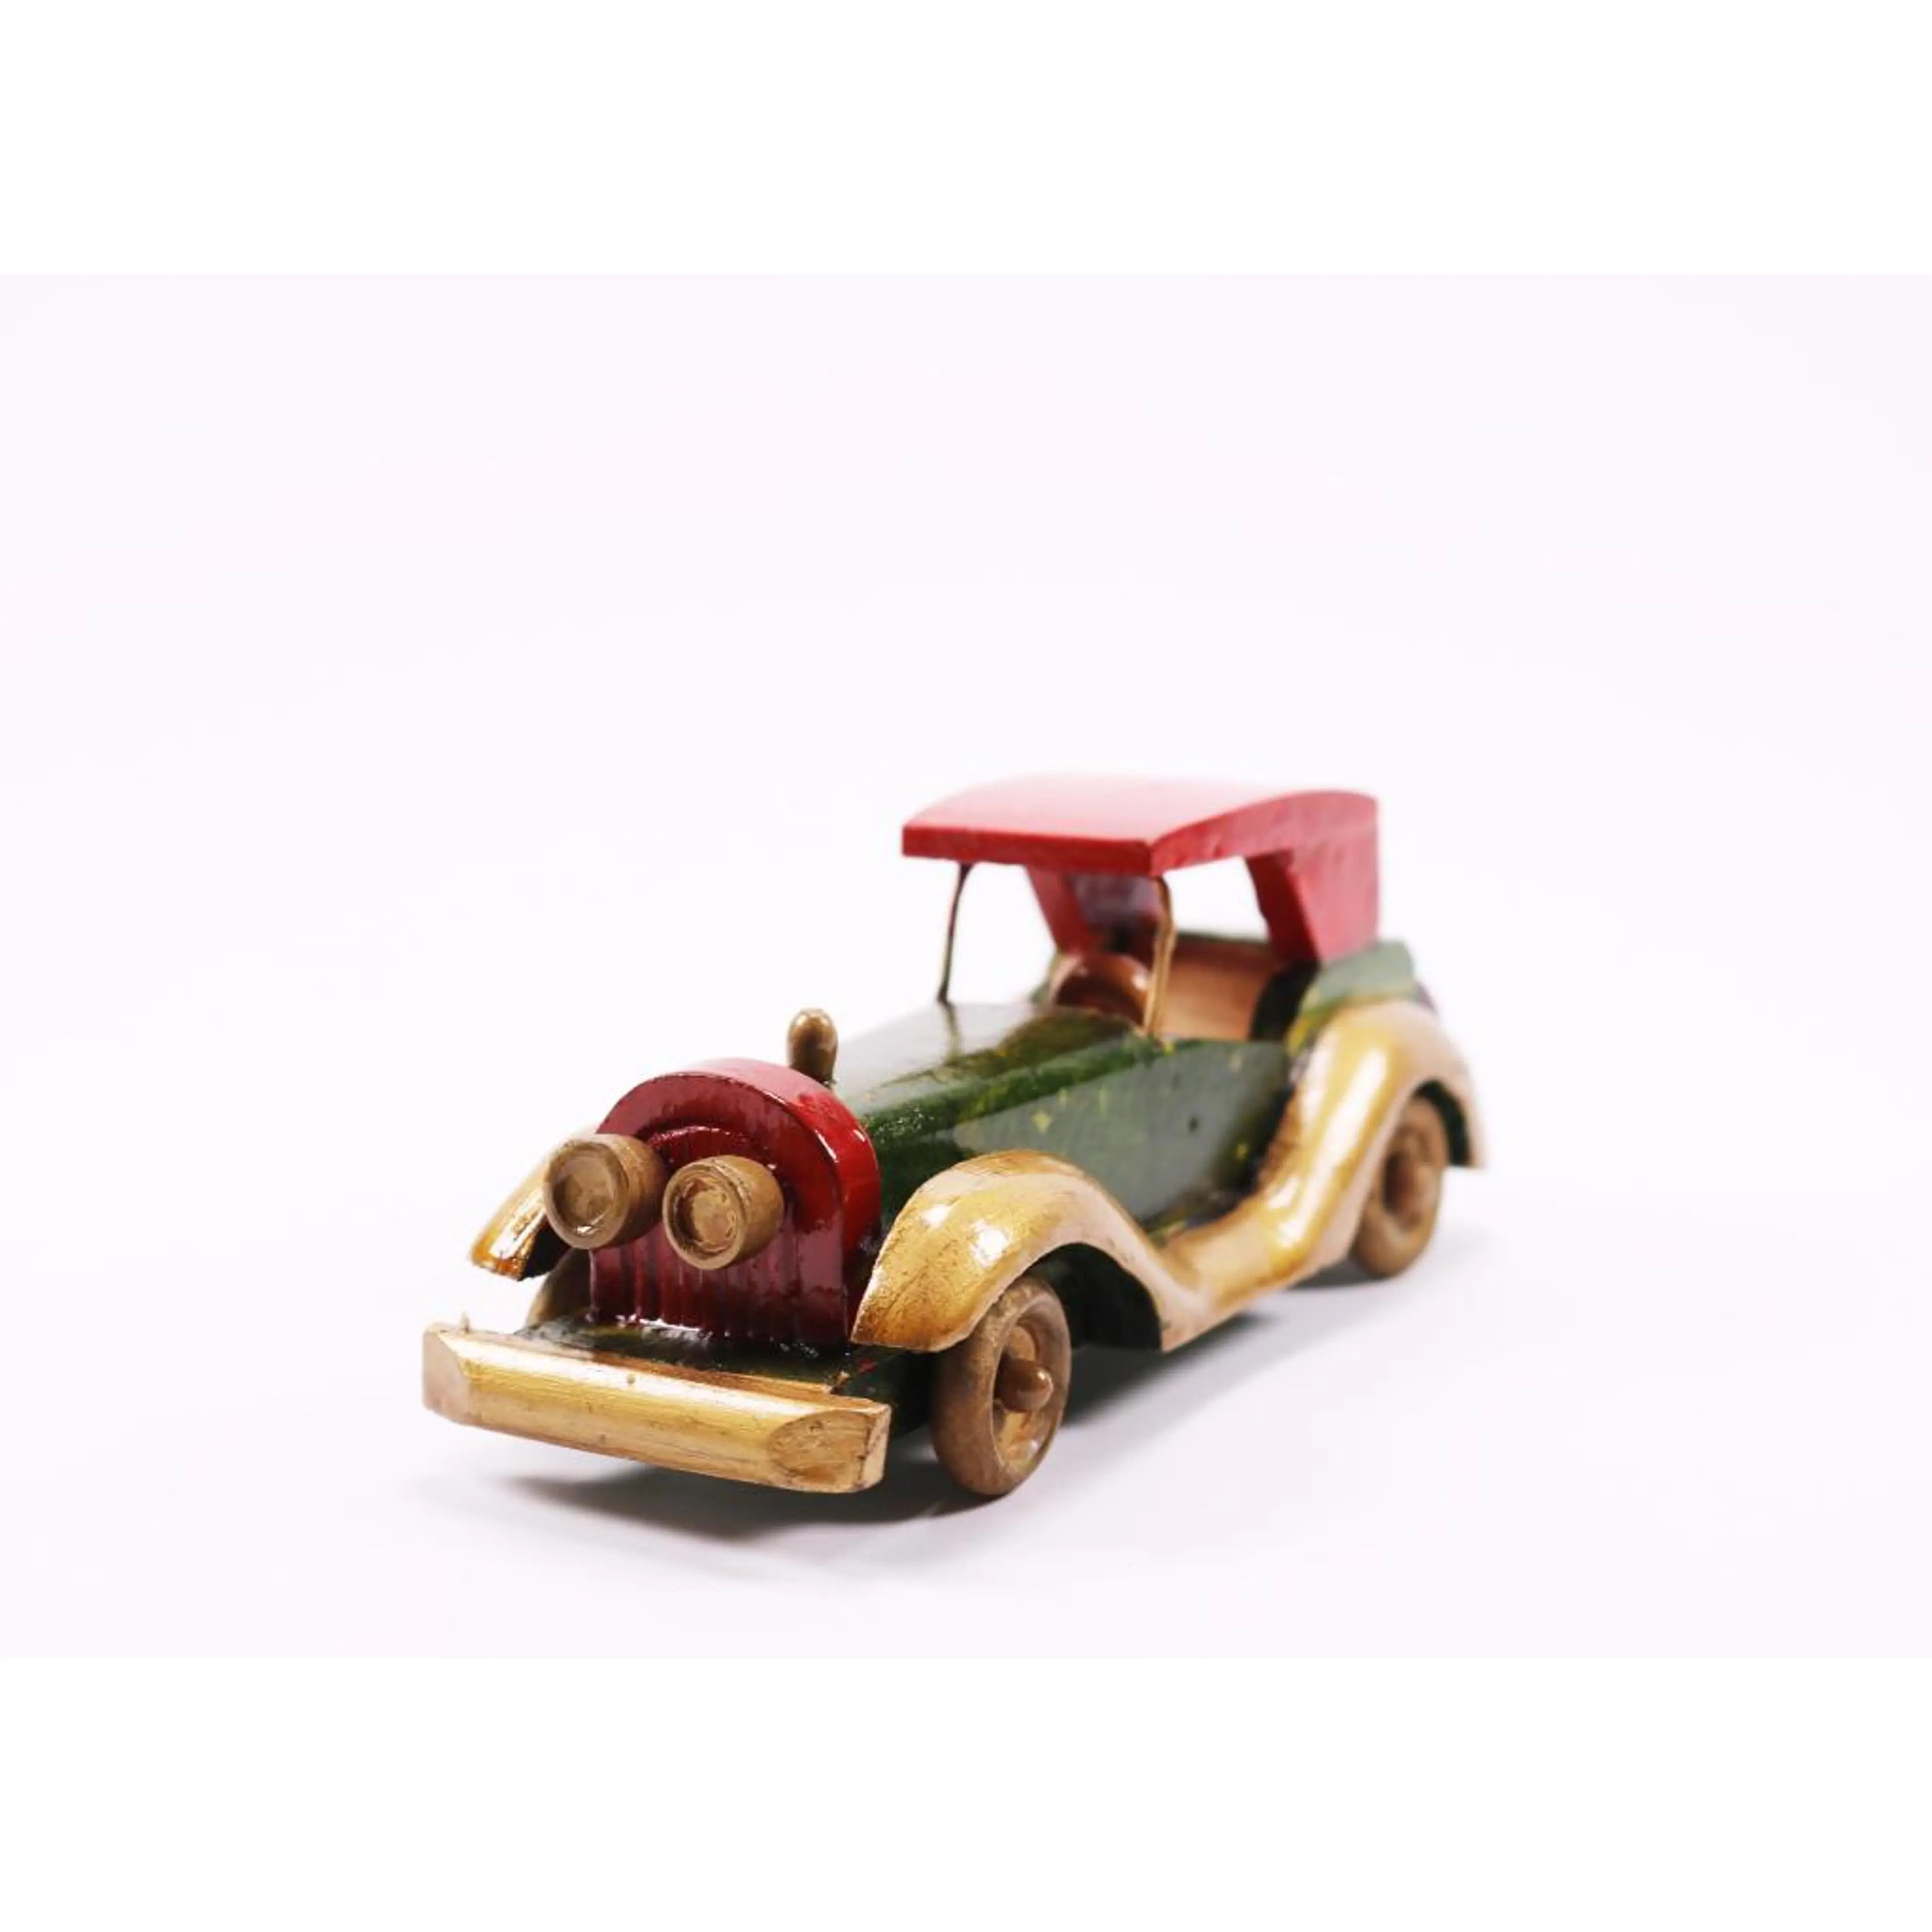 Toy Wooden Car Play Vehicles Vintage